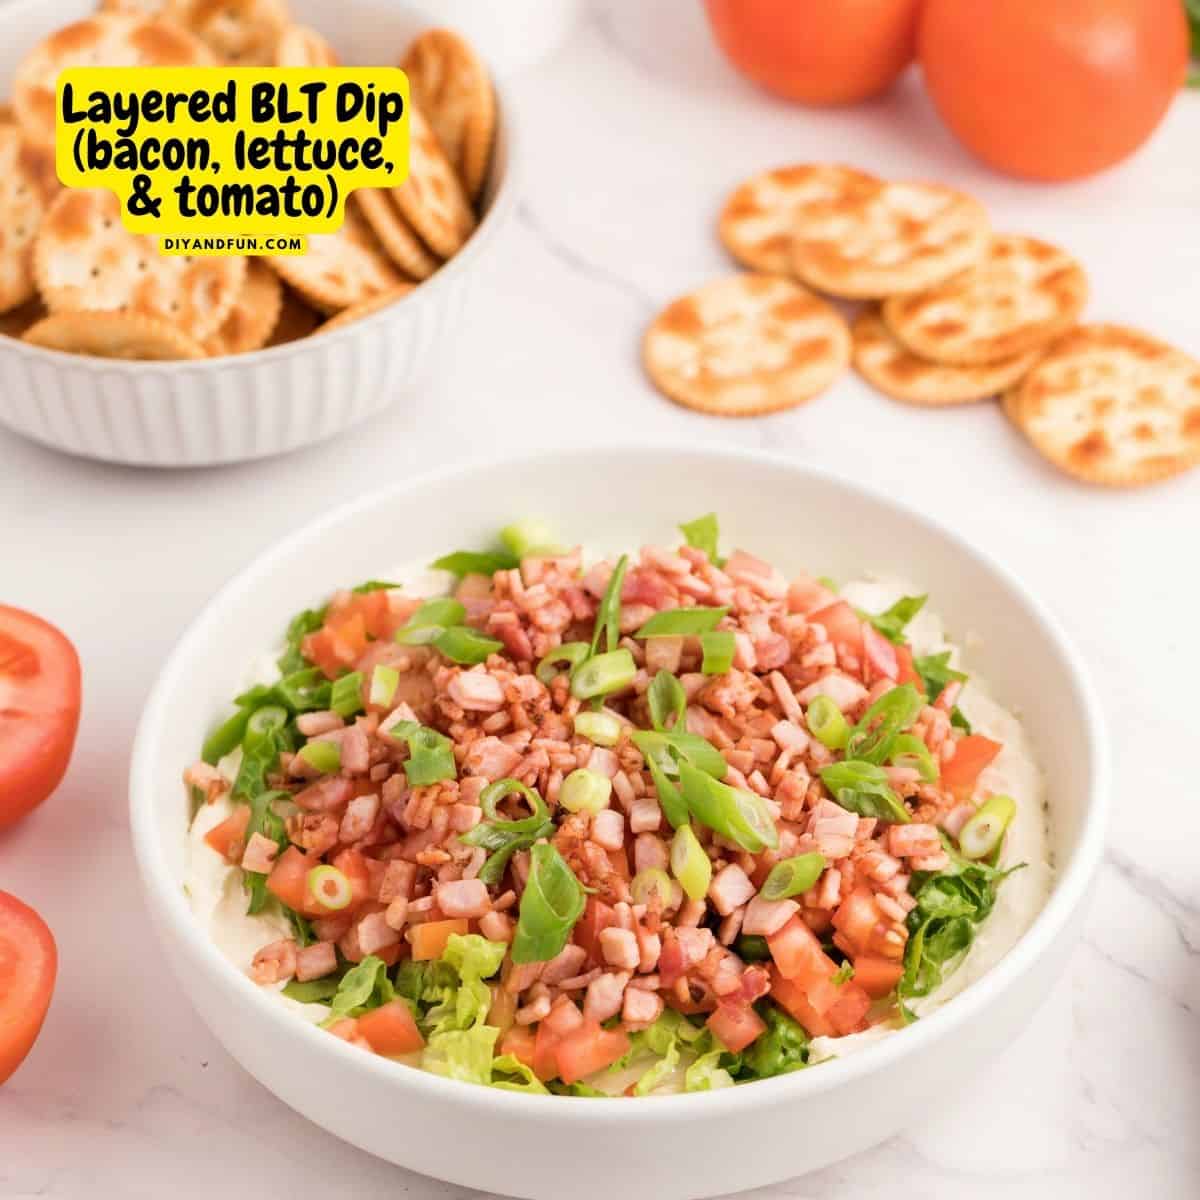  Layered BLT Dip (bacon, lettuce, & tomato),  a delicious and creamy appetizer made with bacon, lettuce, and tomatoes. Keto Low Carb Friendly.